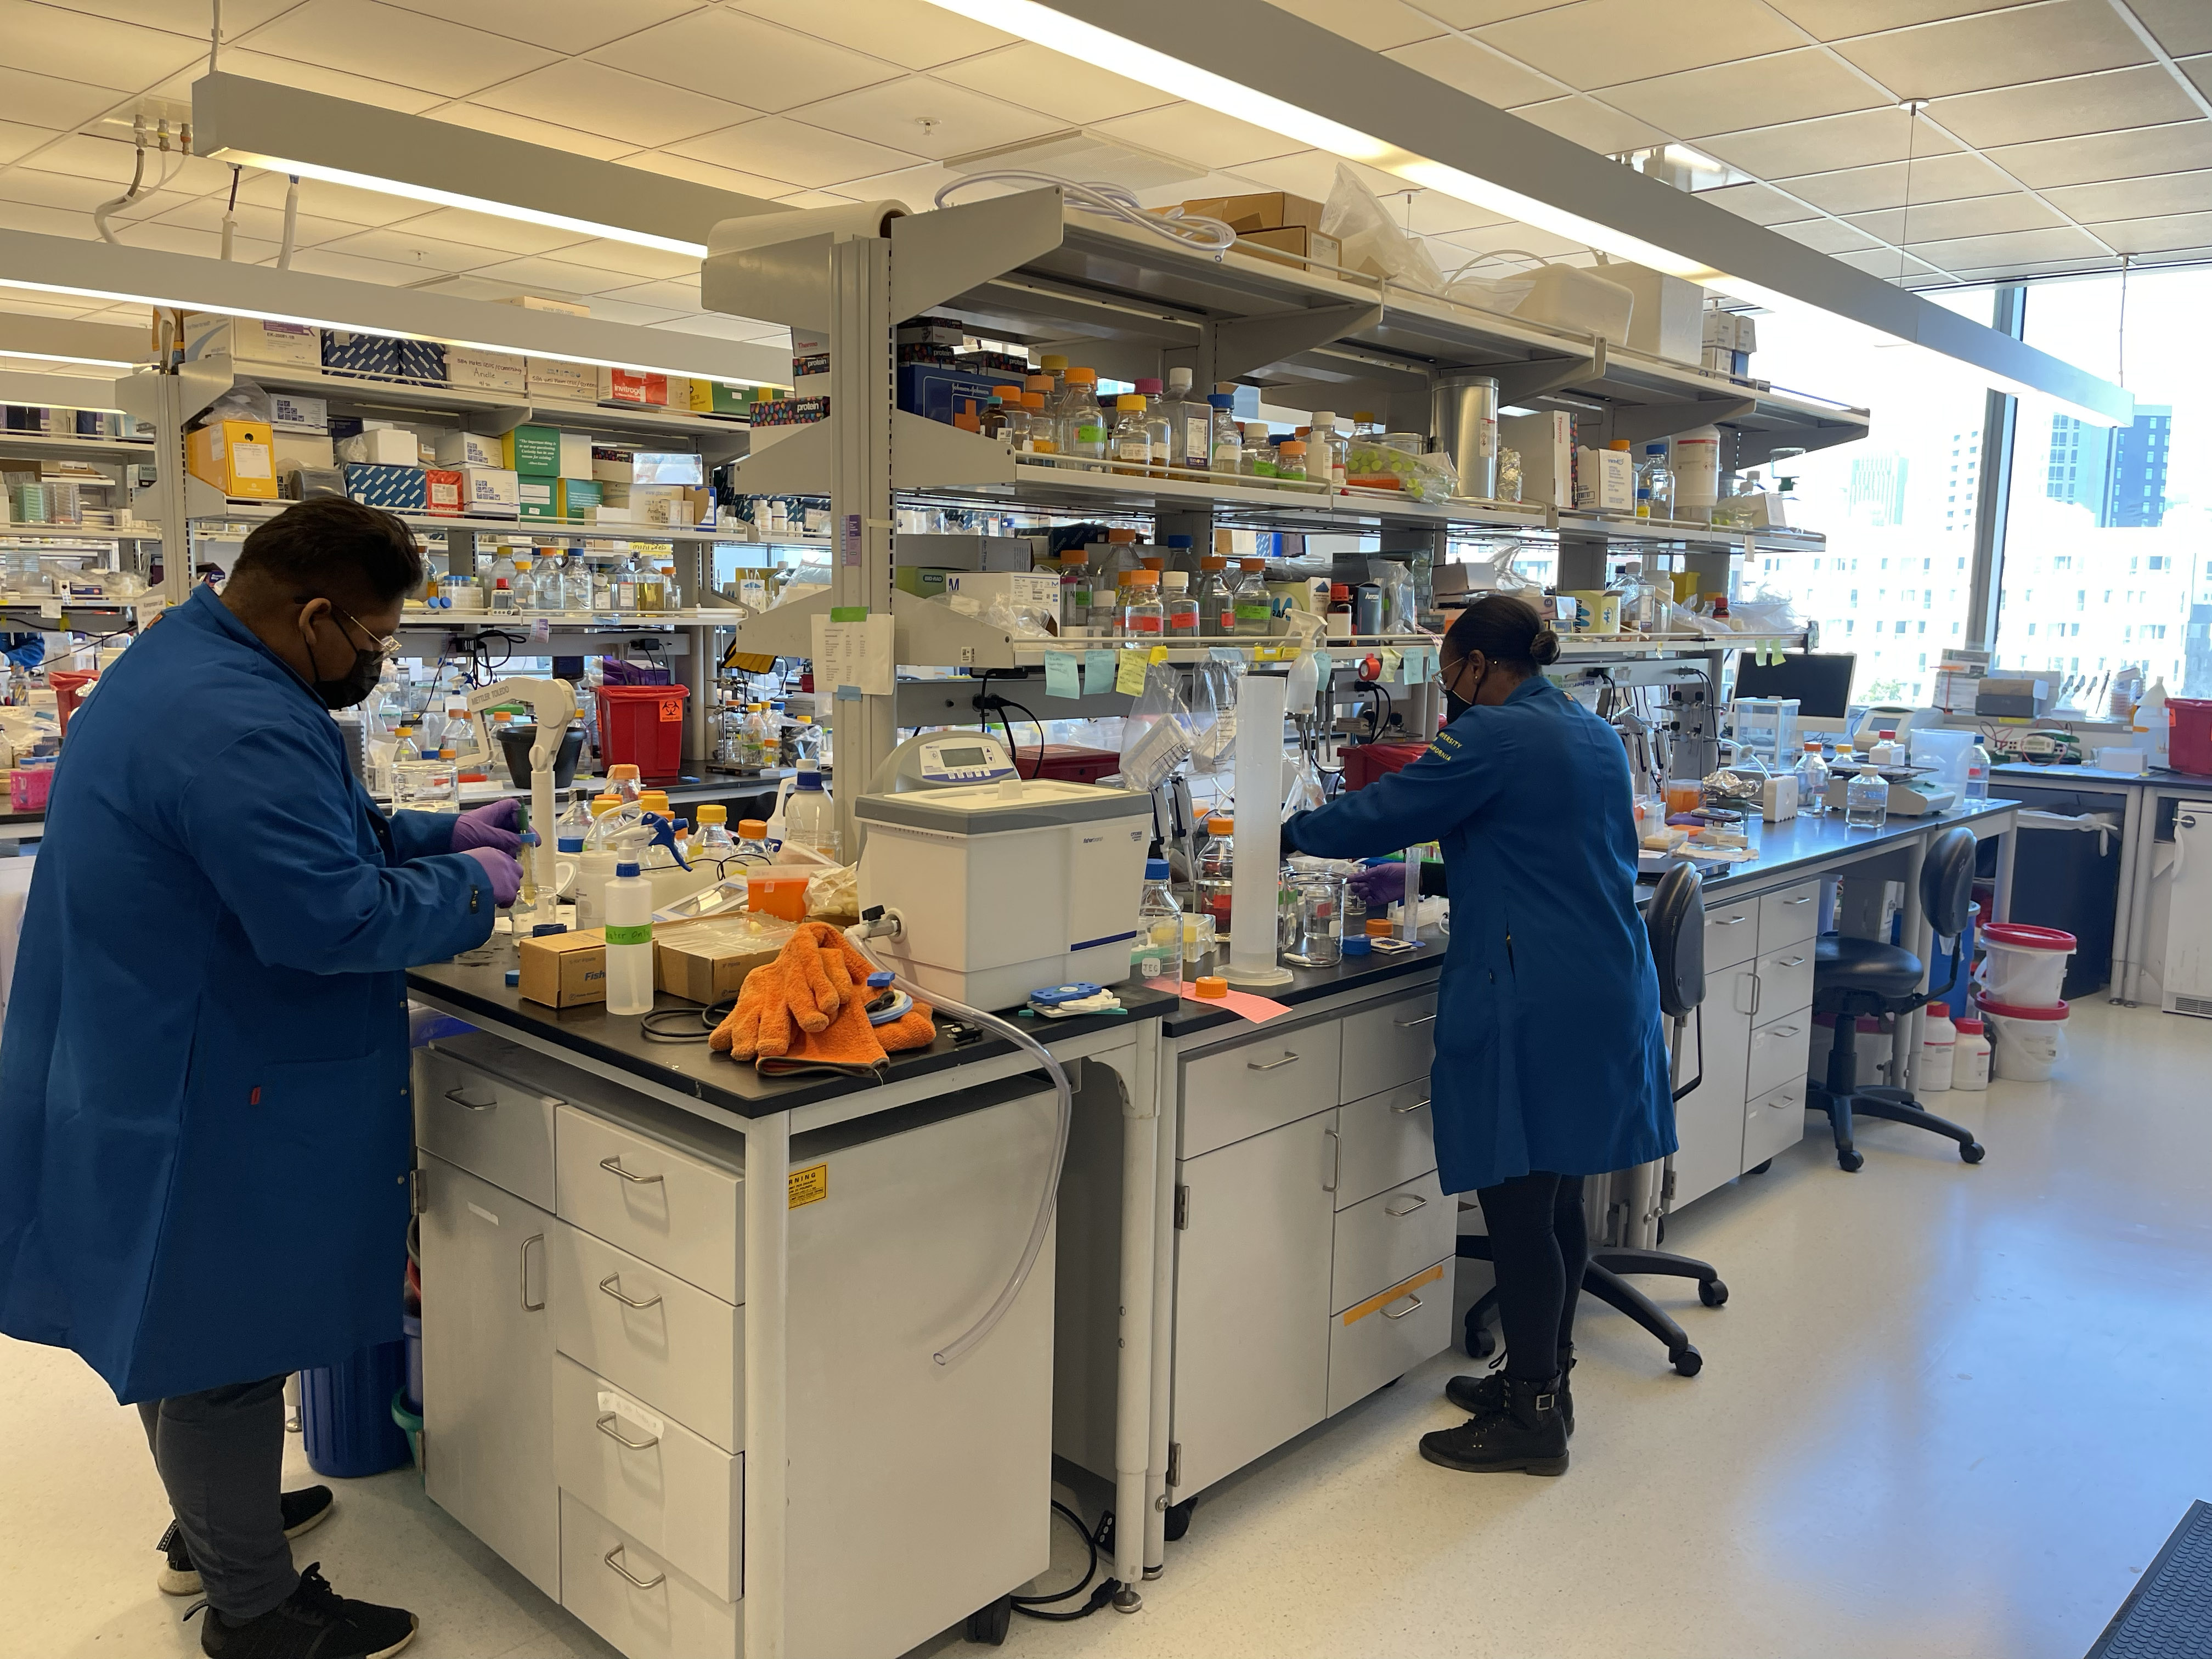 IND members working in the lab